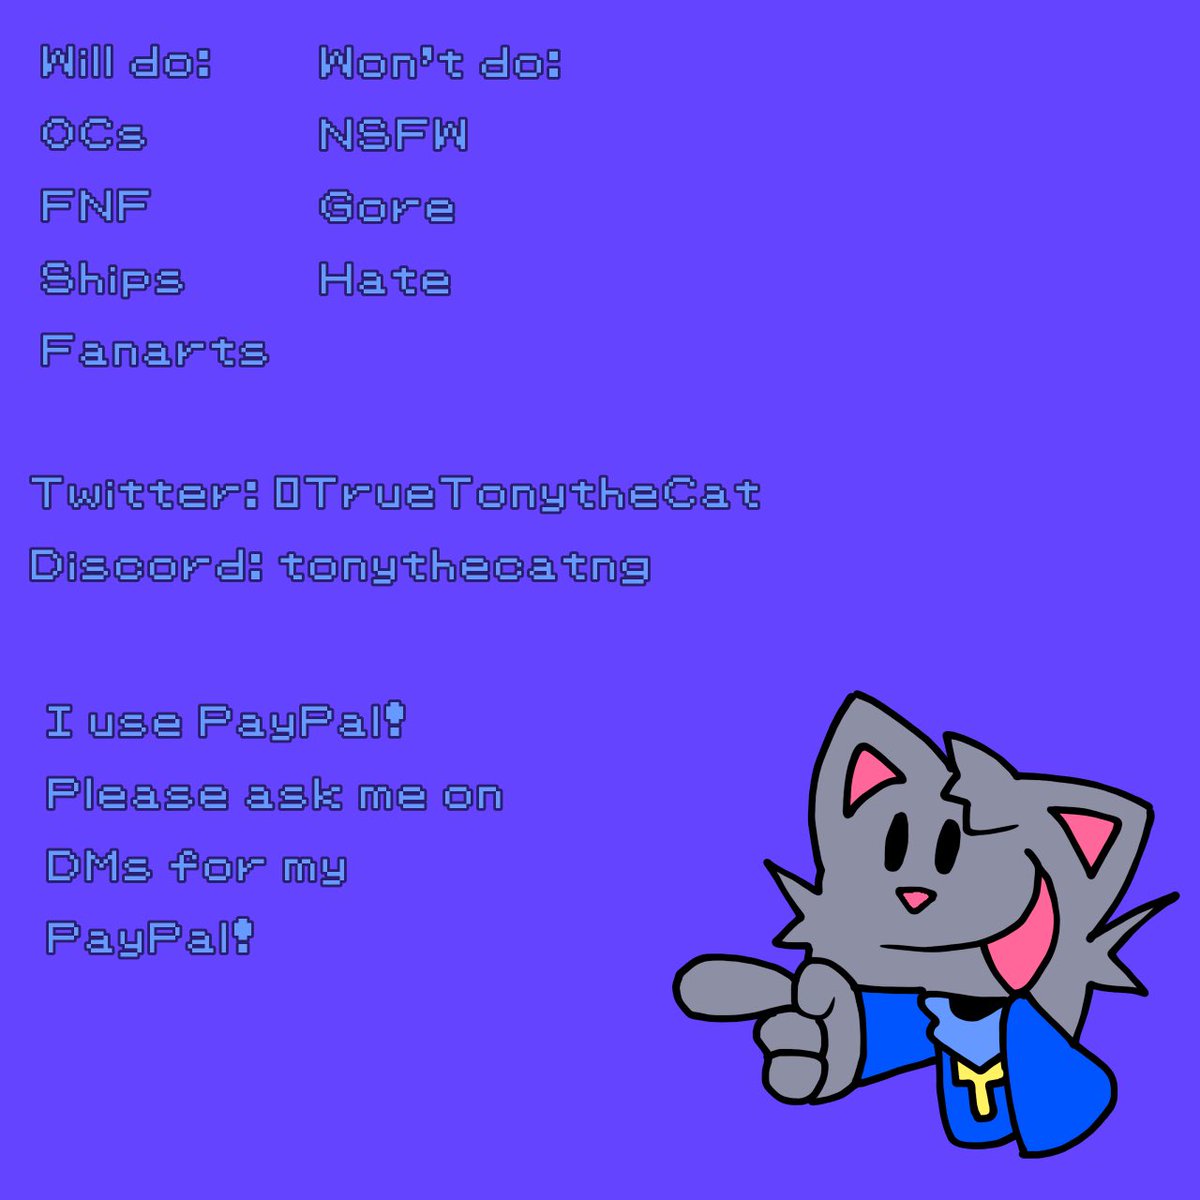 Alright, I officially opened for business for commissions! I use PayPal and you may see me for details for commissions! These are my prices and hope to make some commissions soon! DM me if interested!